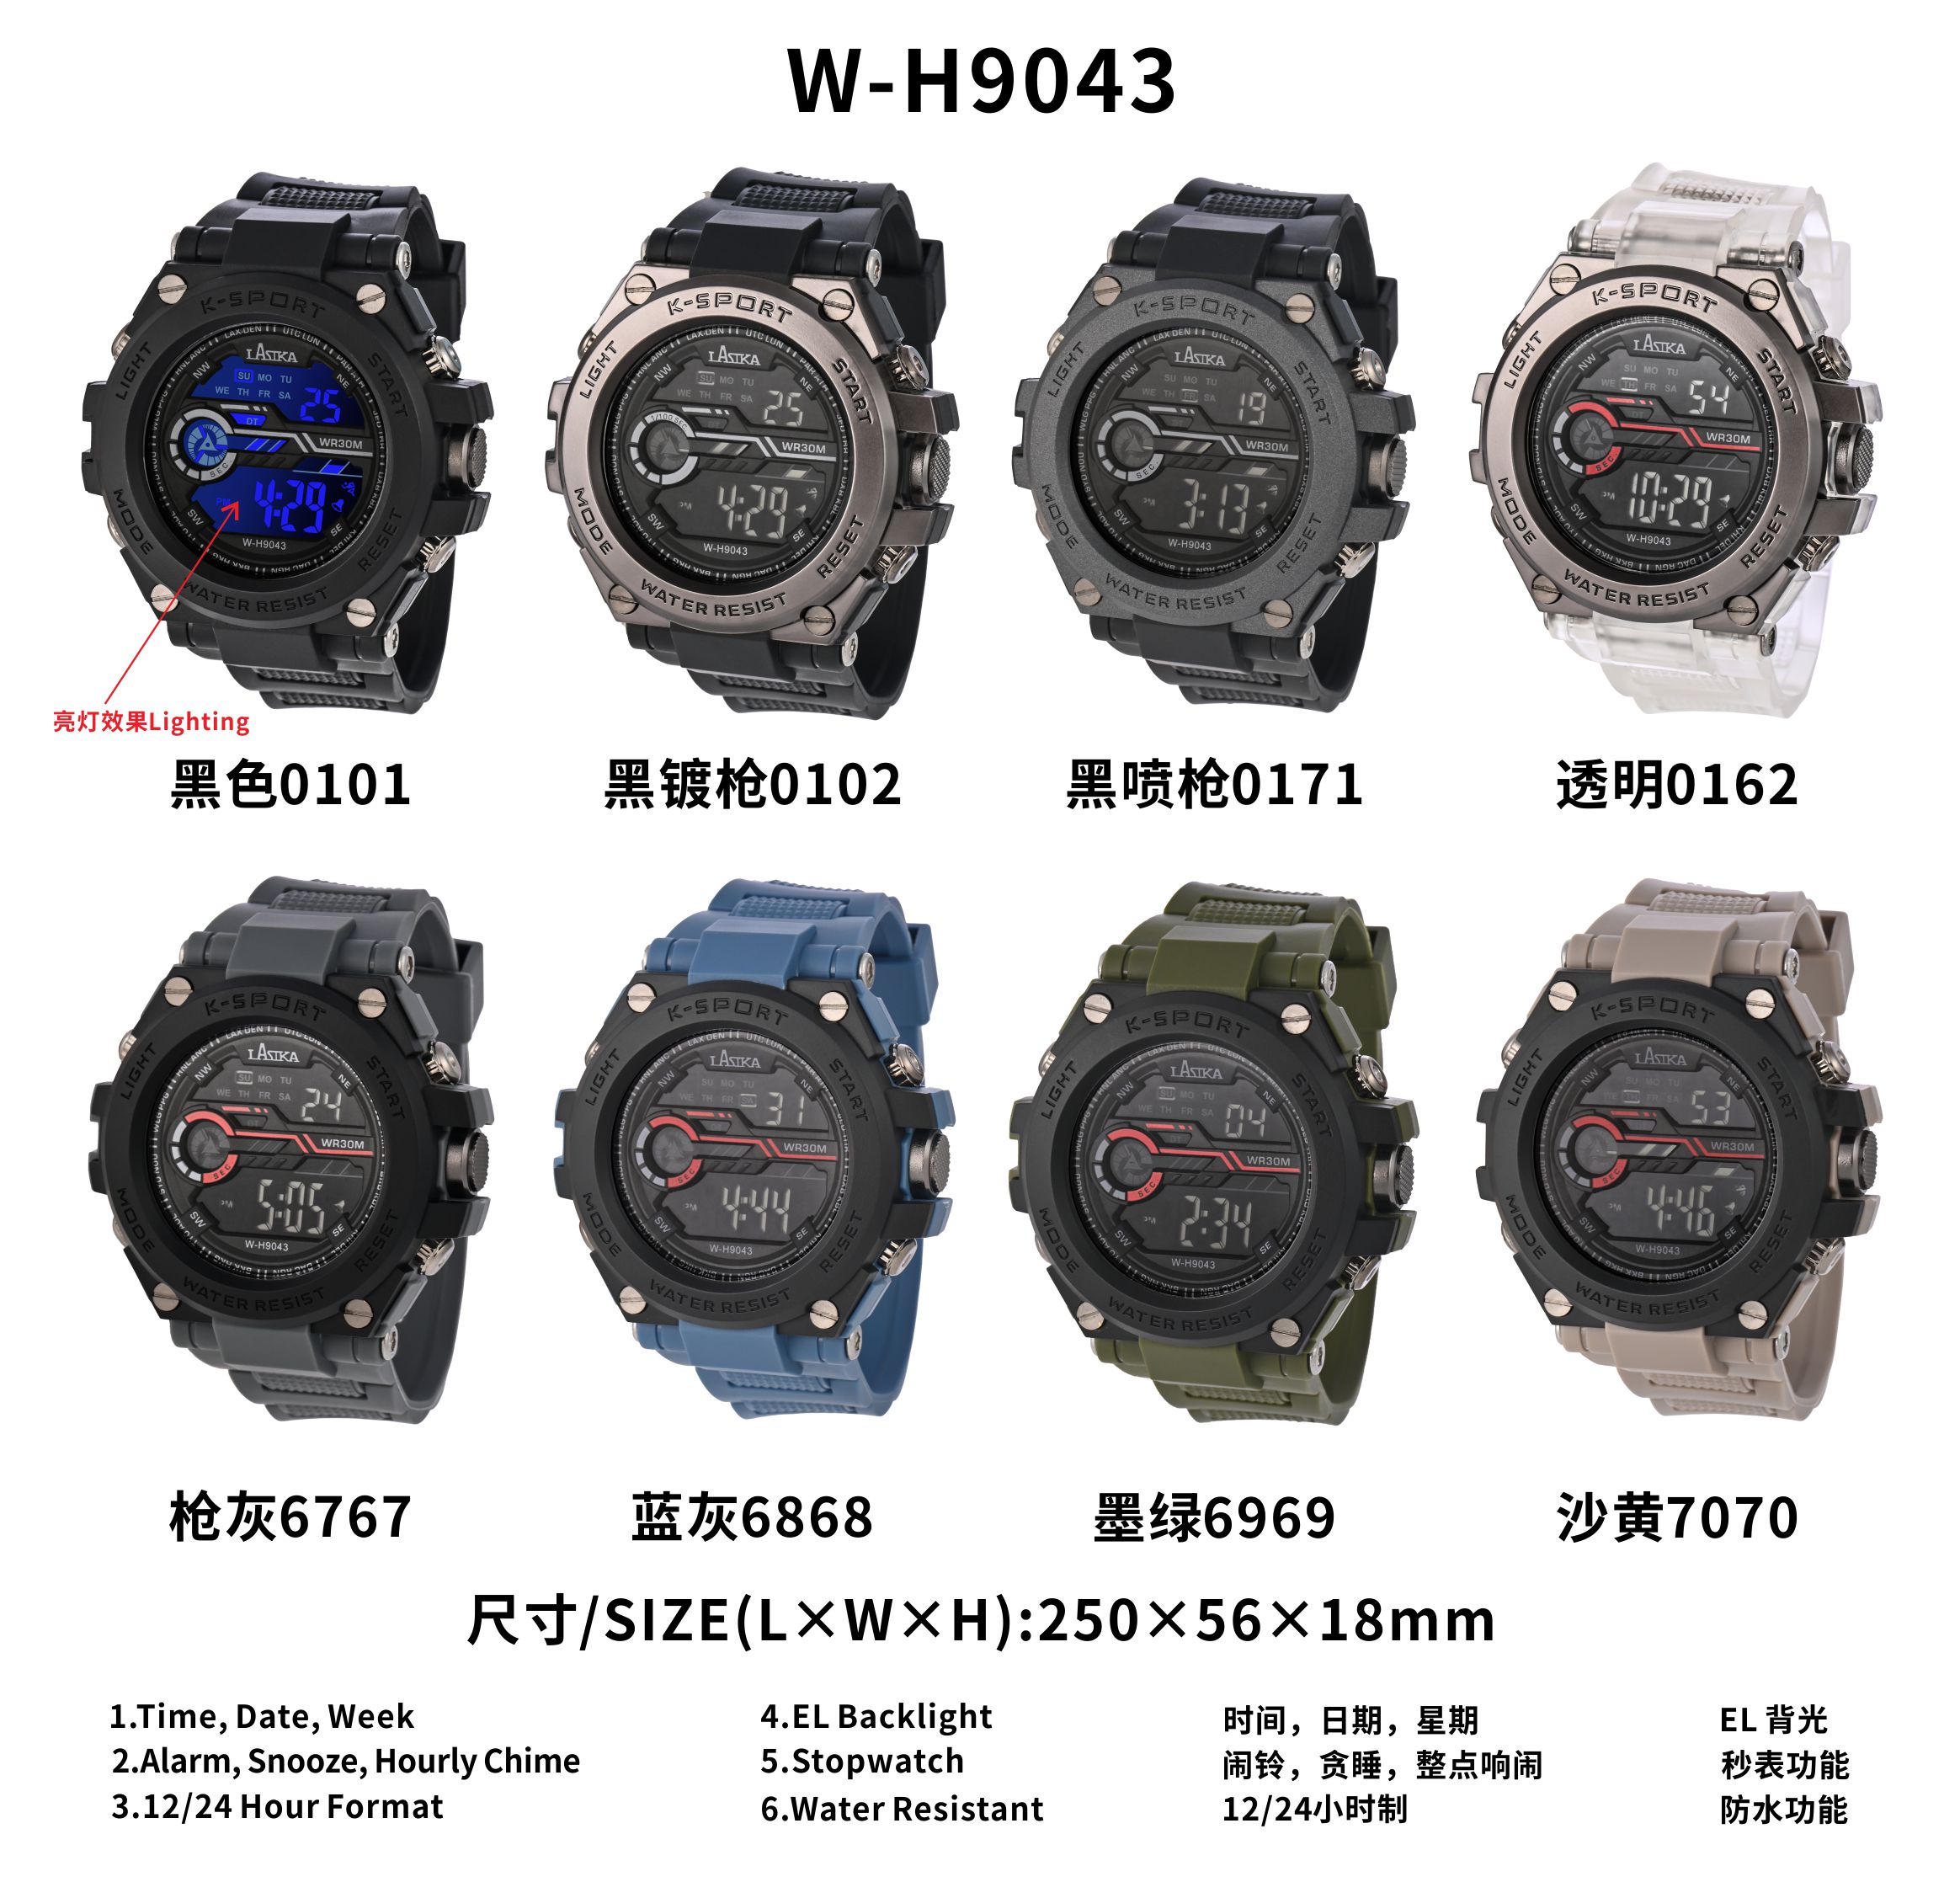 Men's Digital Sport Watch Large Face Sports Outdoor Waterproof Military Wrist Watches for Men with Date Multifunction Army Stopwatch #9043